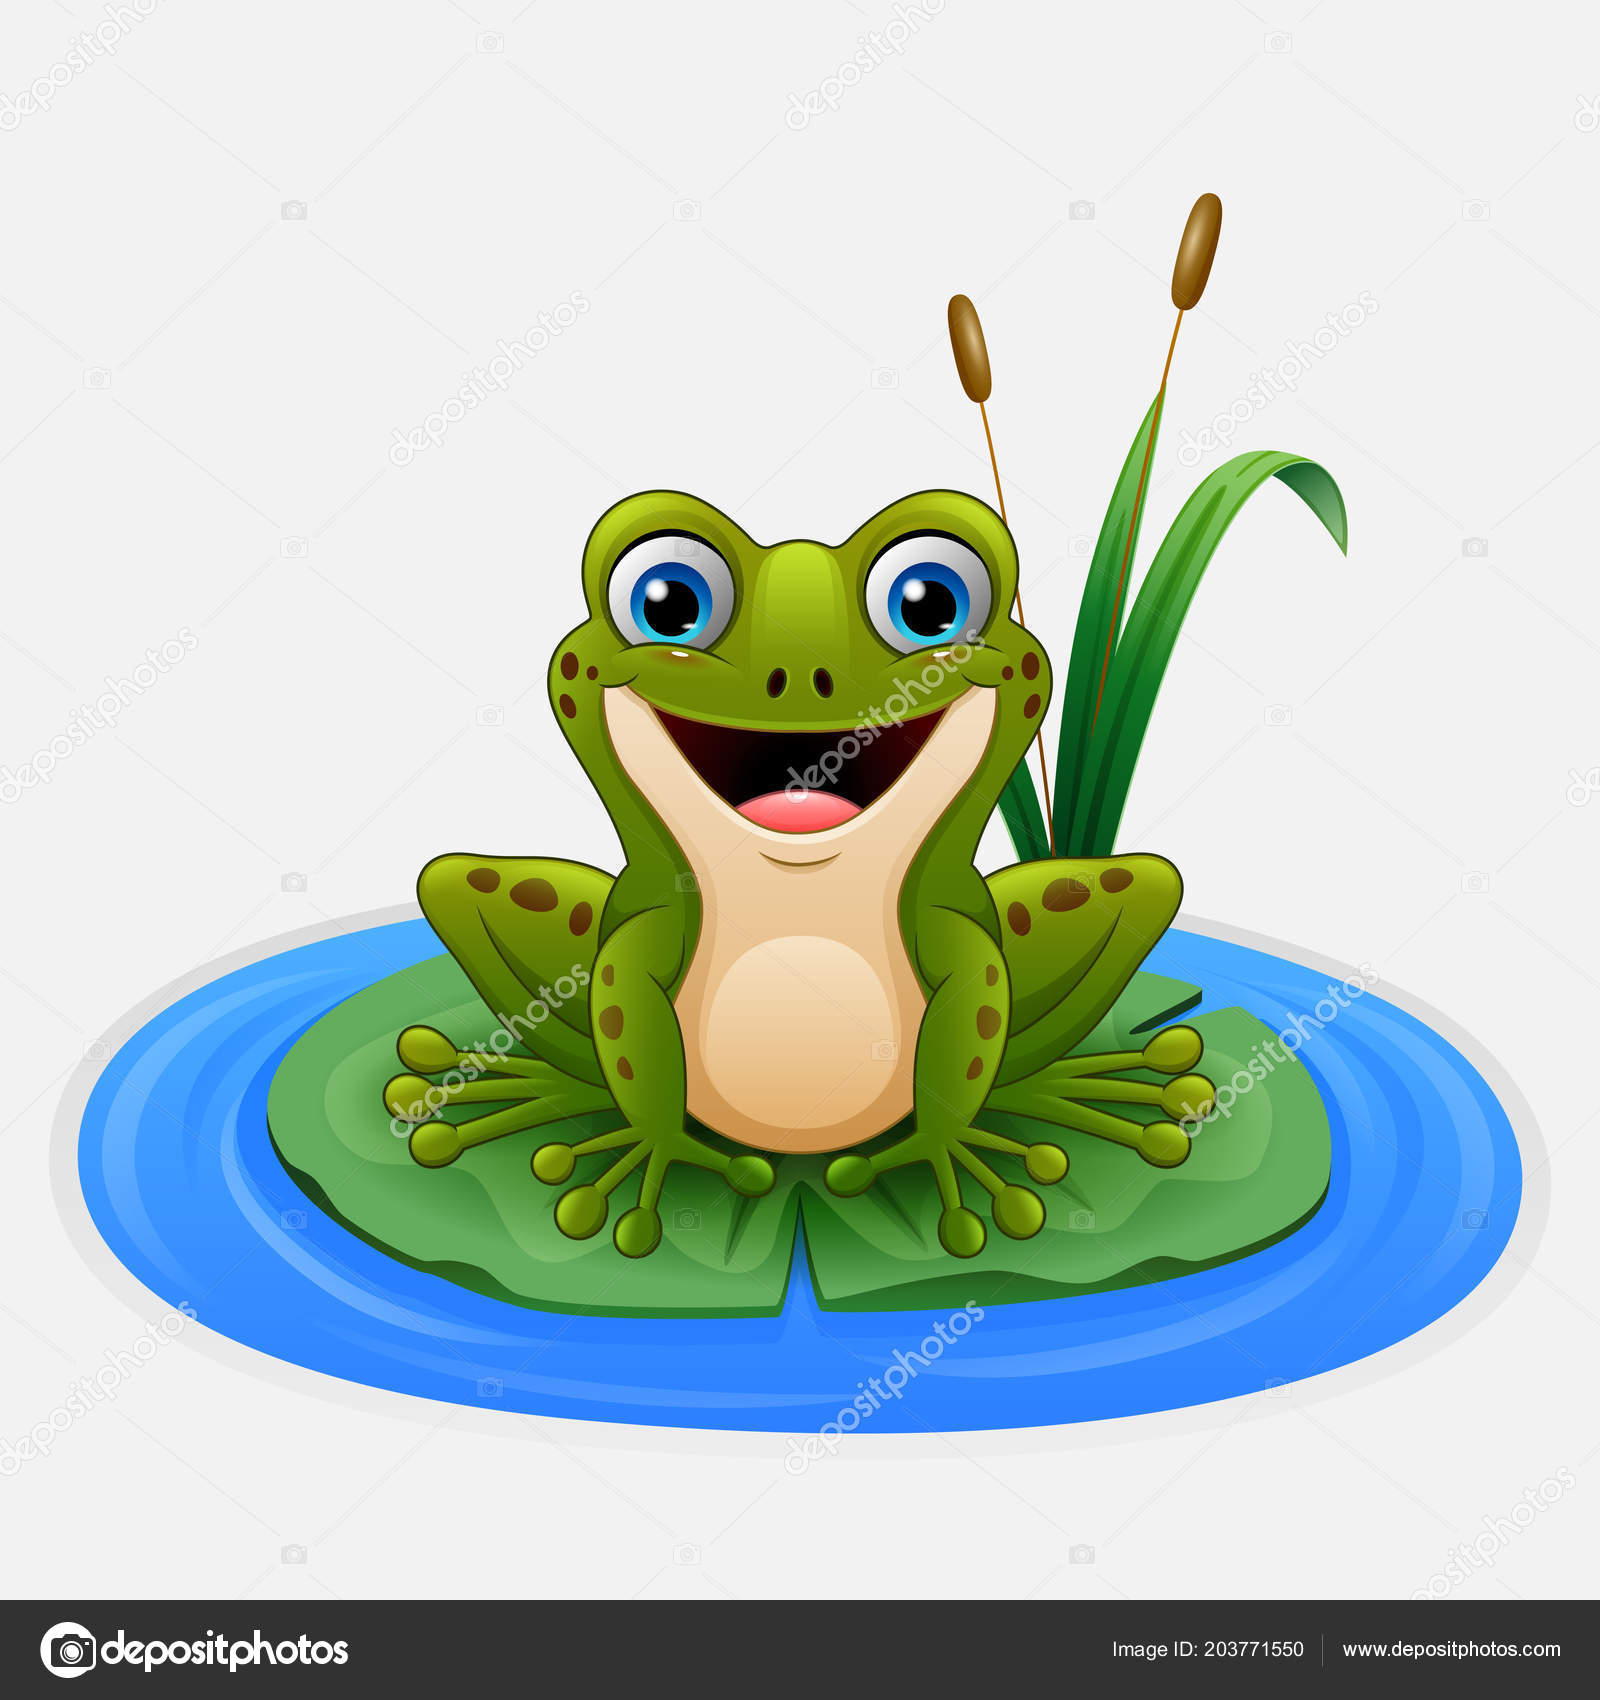 Frog Girl Anime PNG Tuber/pngtuber Brown Hair Avatar for Twitch Streamers,  Discord, Youtube, Tiktok/ Cute, Kawaii, Ready to Use - Etsy